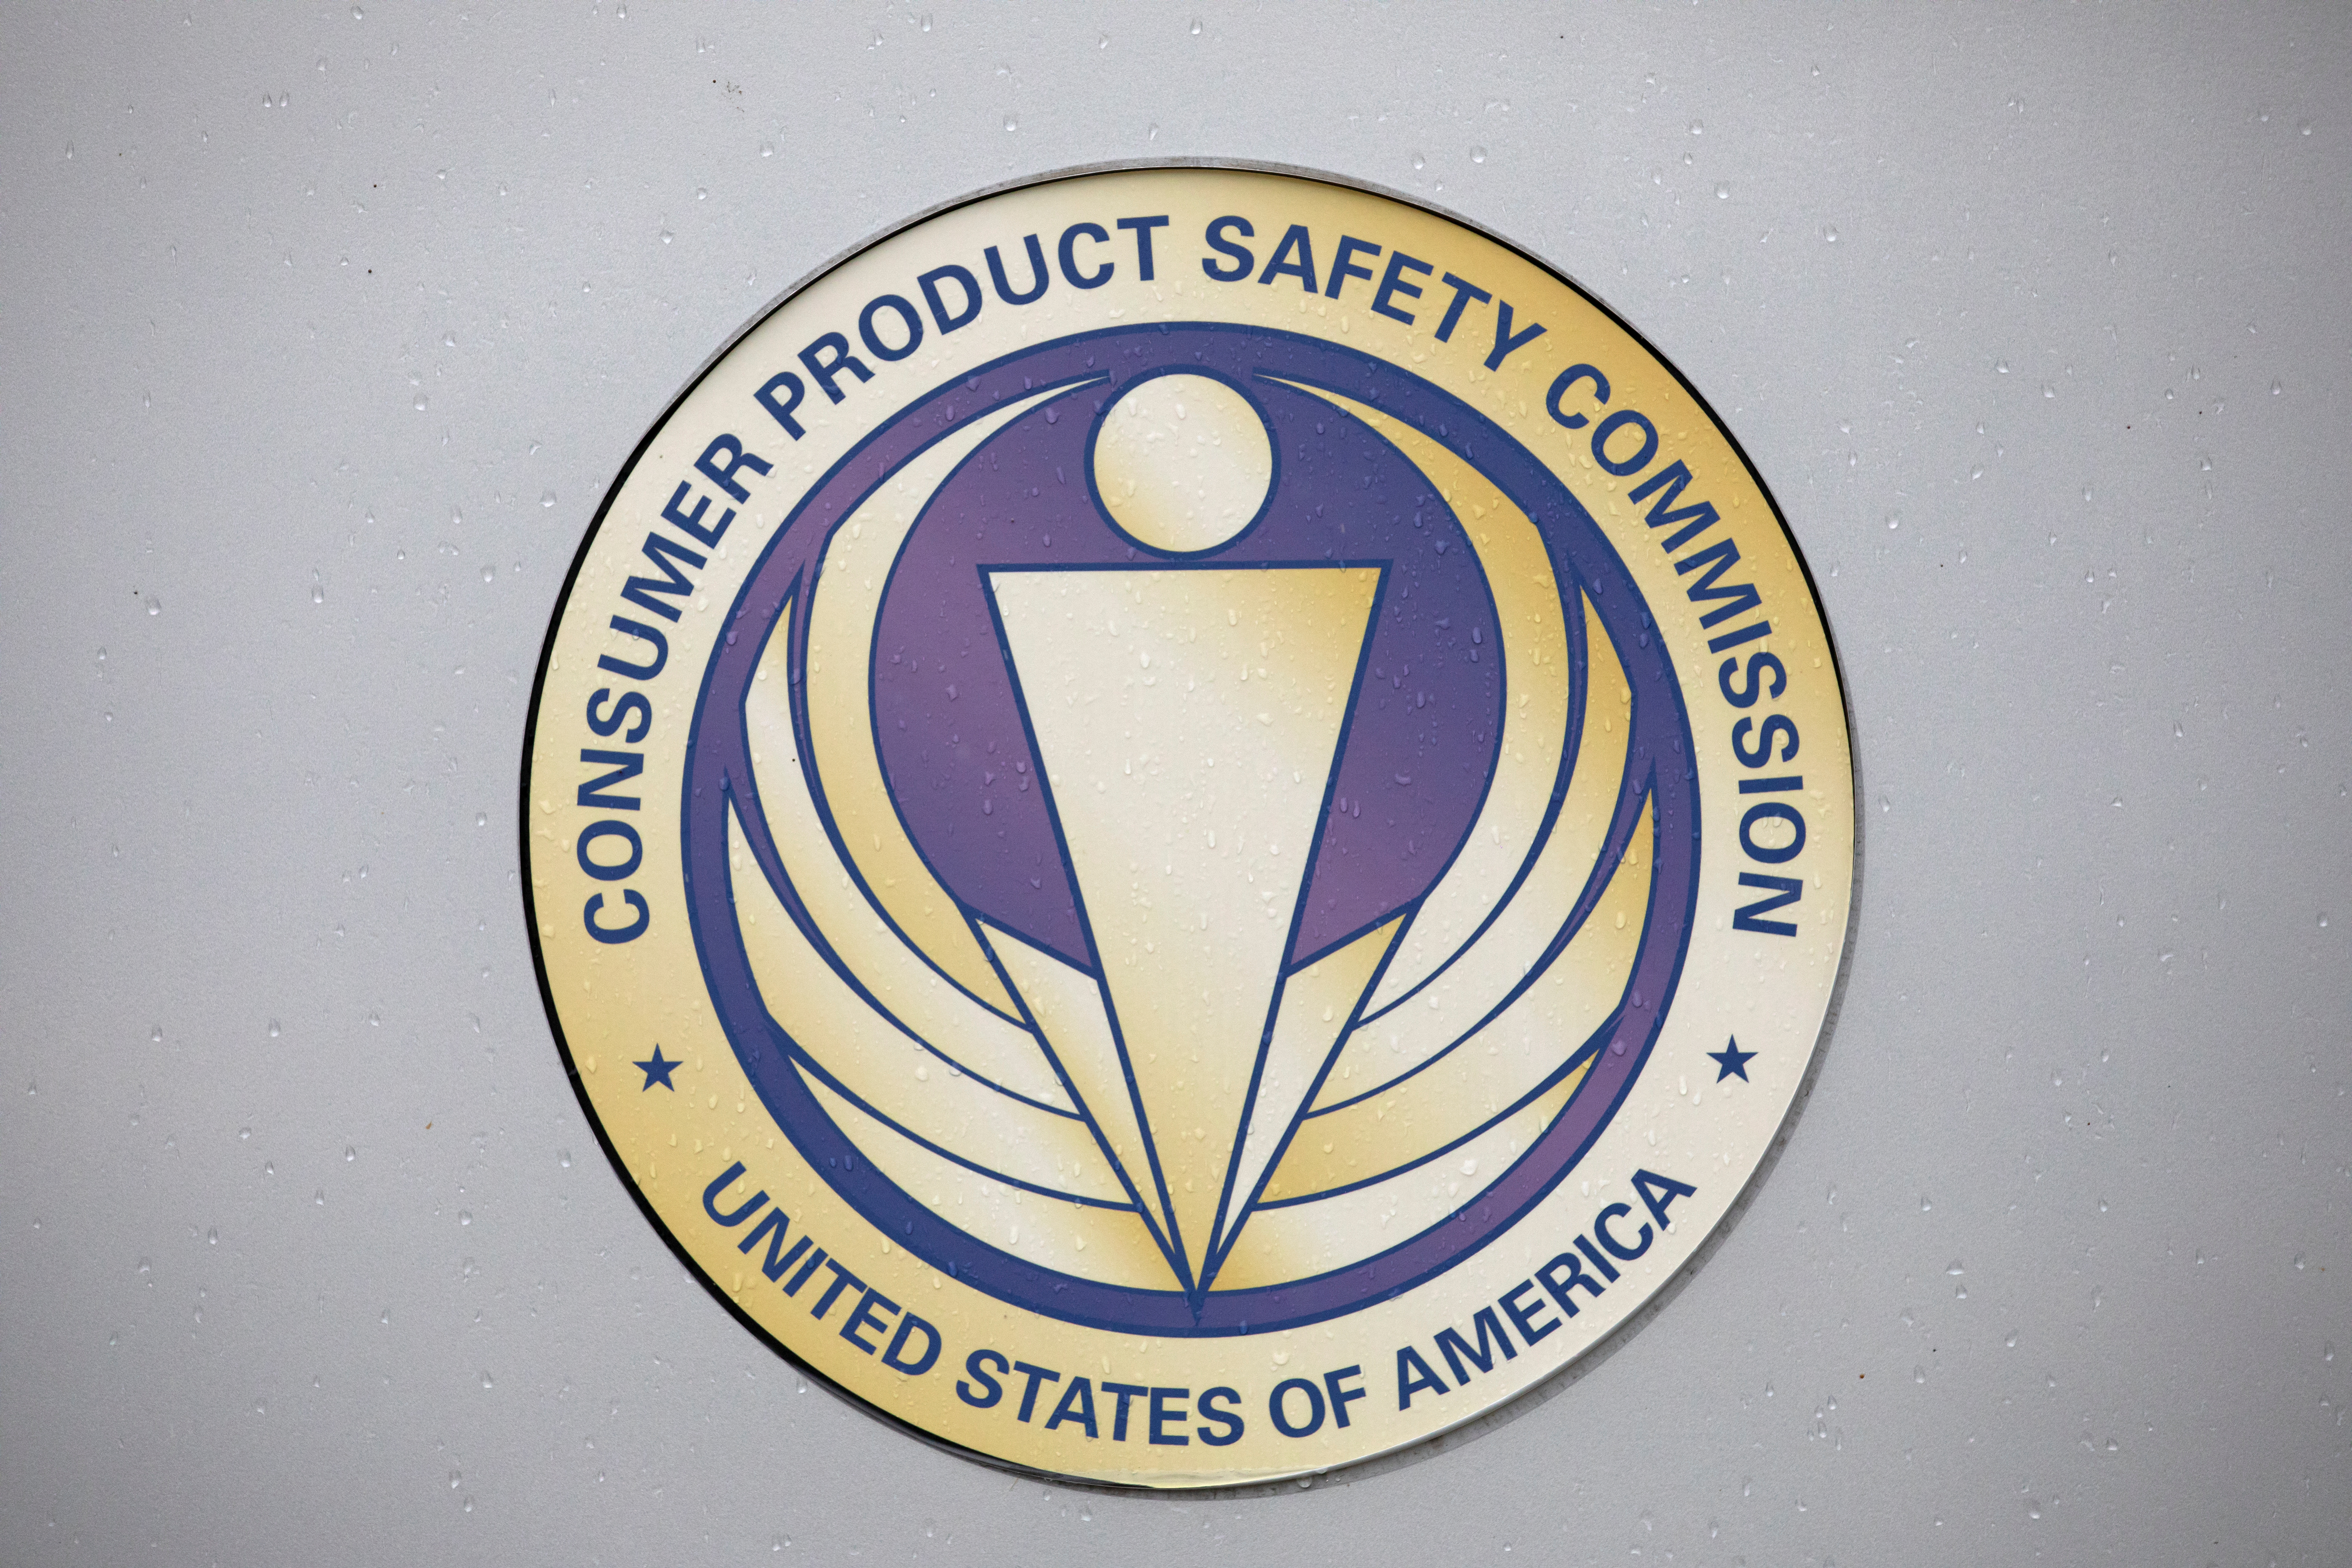 Signage is seen outside of the U.S. Consumer Product Safety Commission in Rockville, Maryland